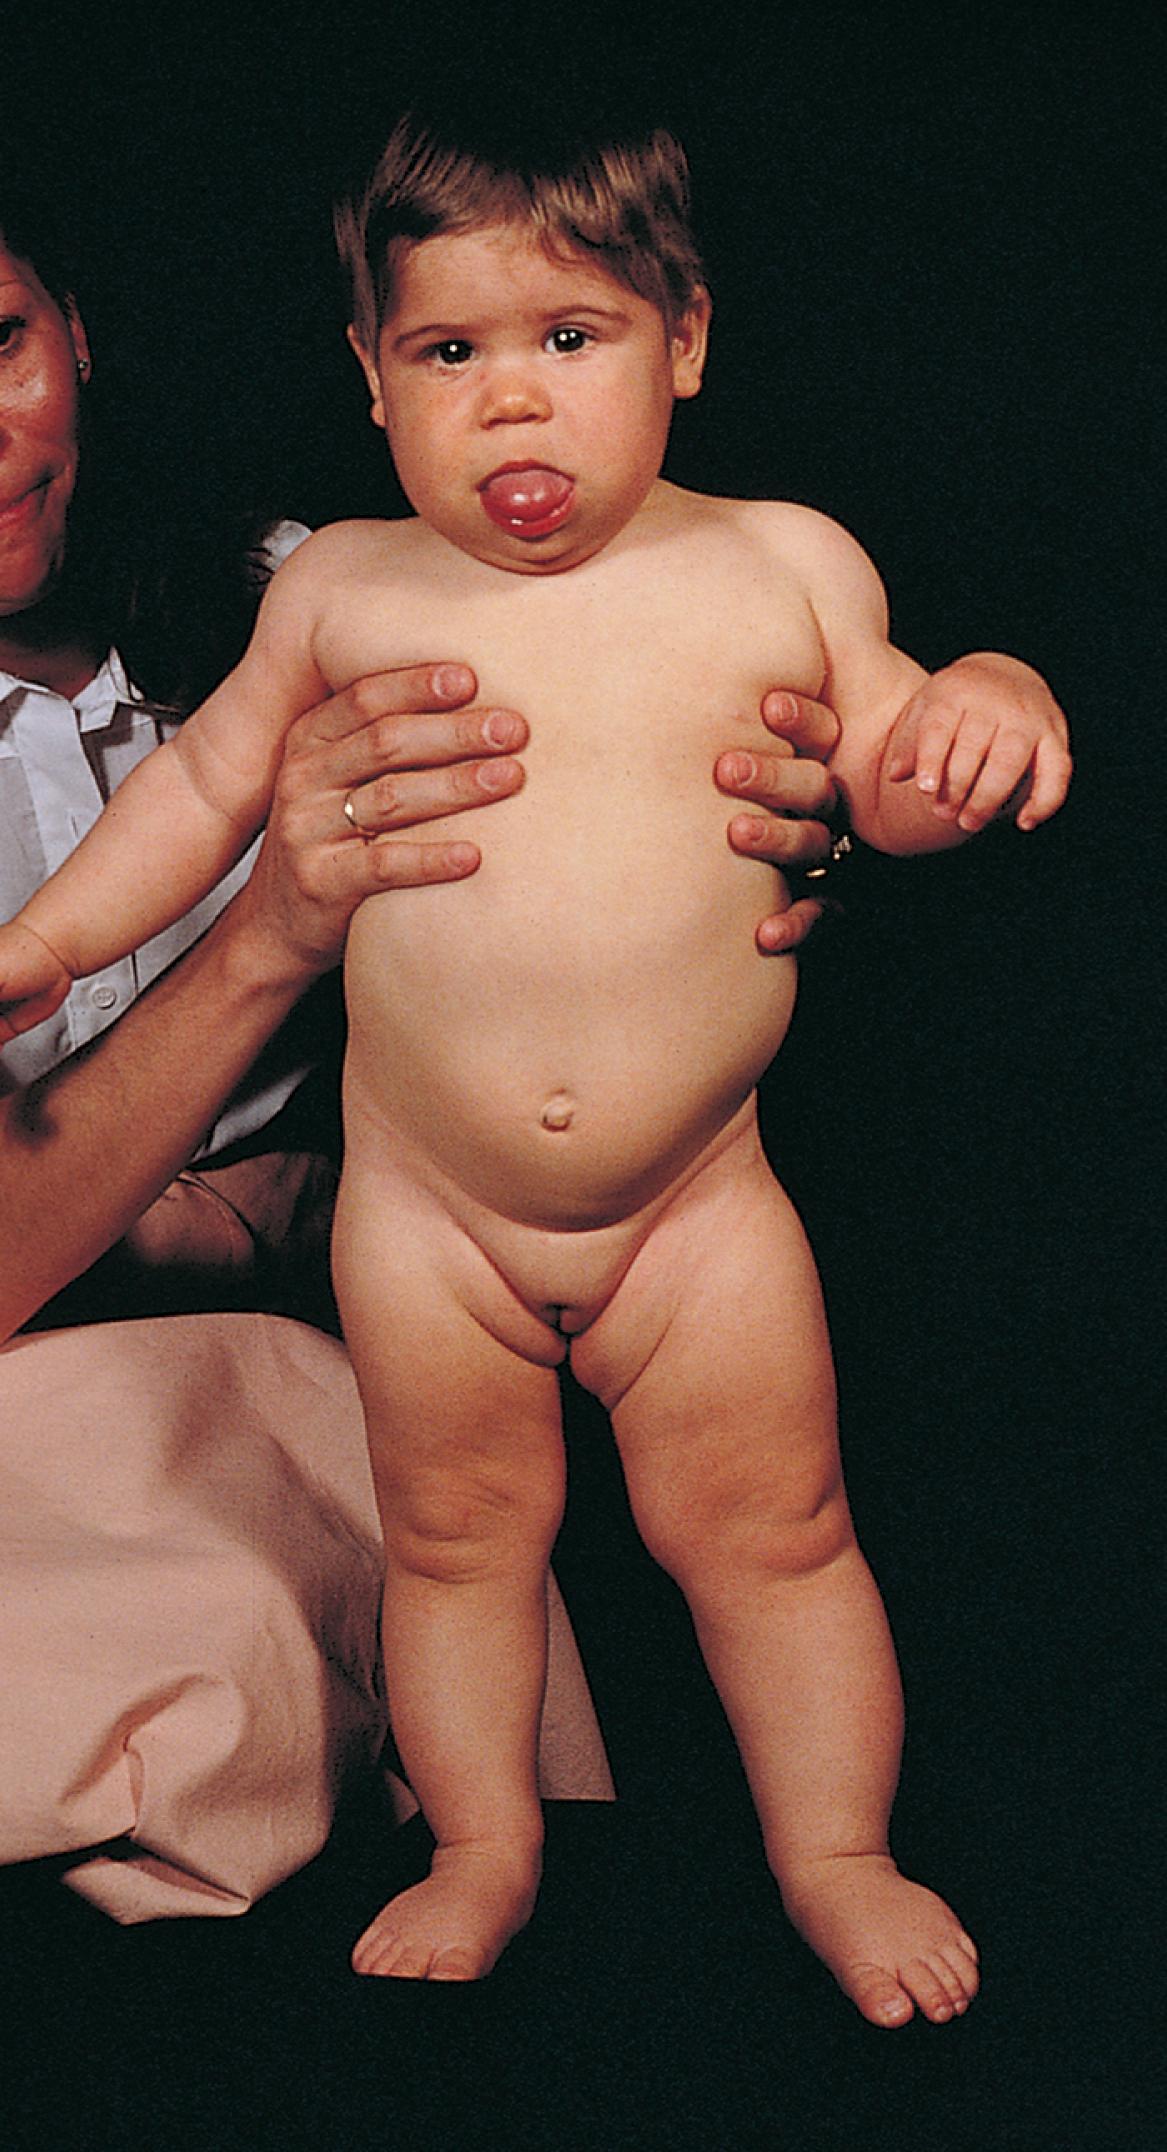 Fig. 18.15, Beckwith-Wiedemann syndrome. Note hemihypertrophy on the left side, along with the prominence of the tongue.